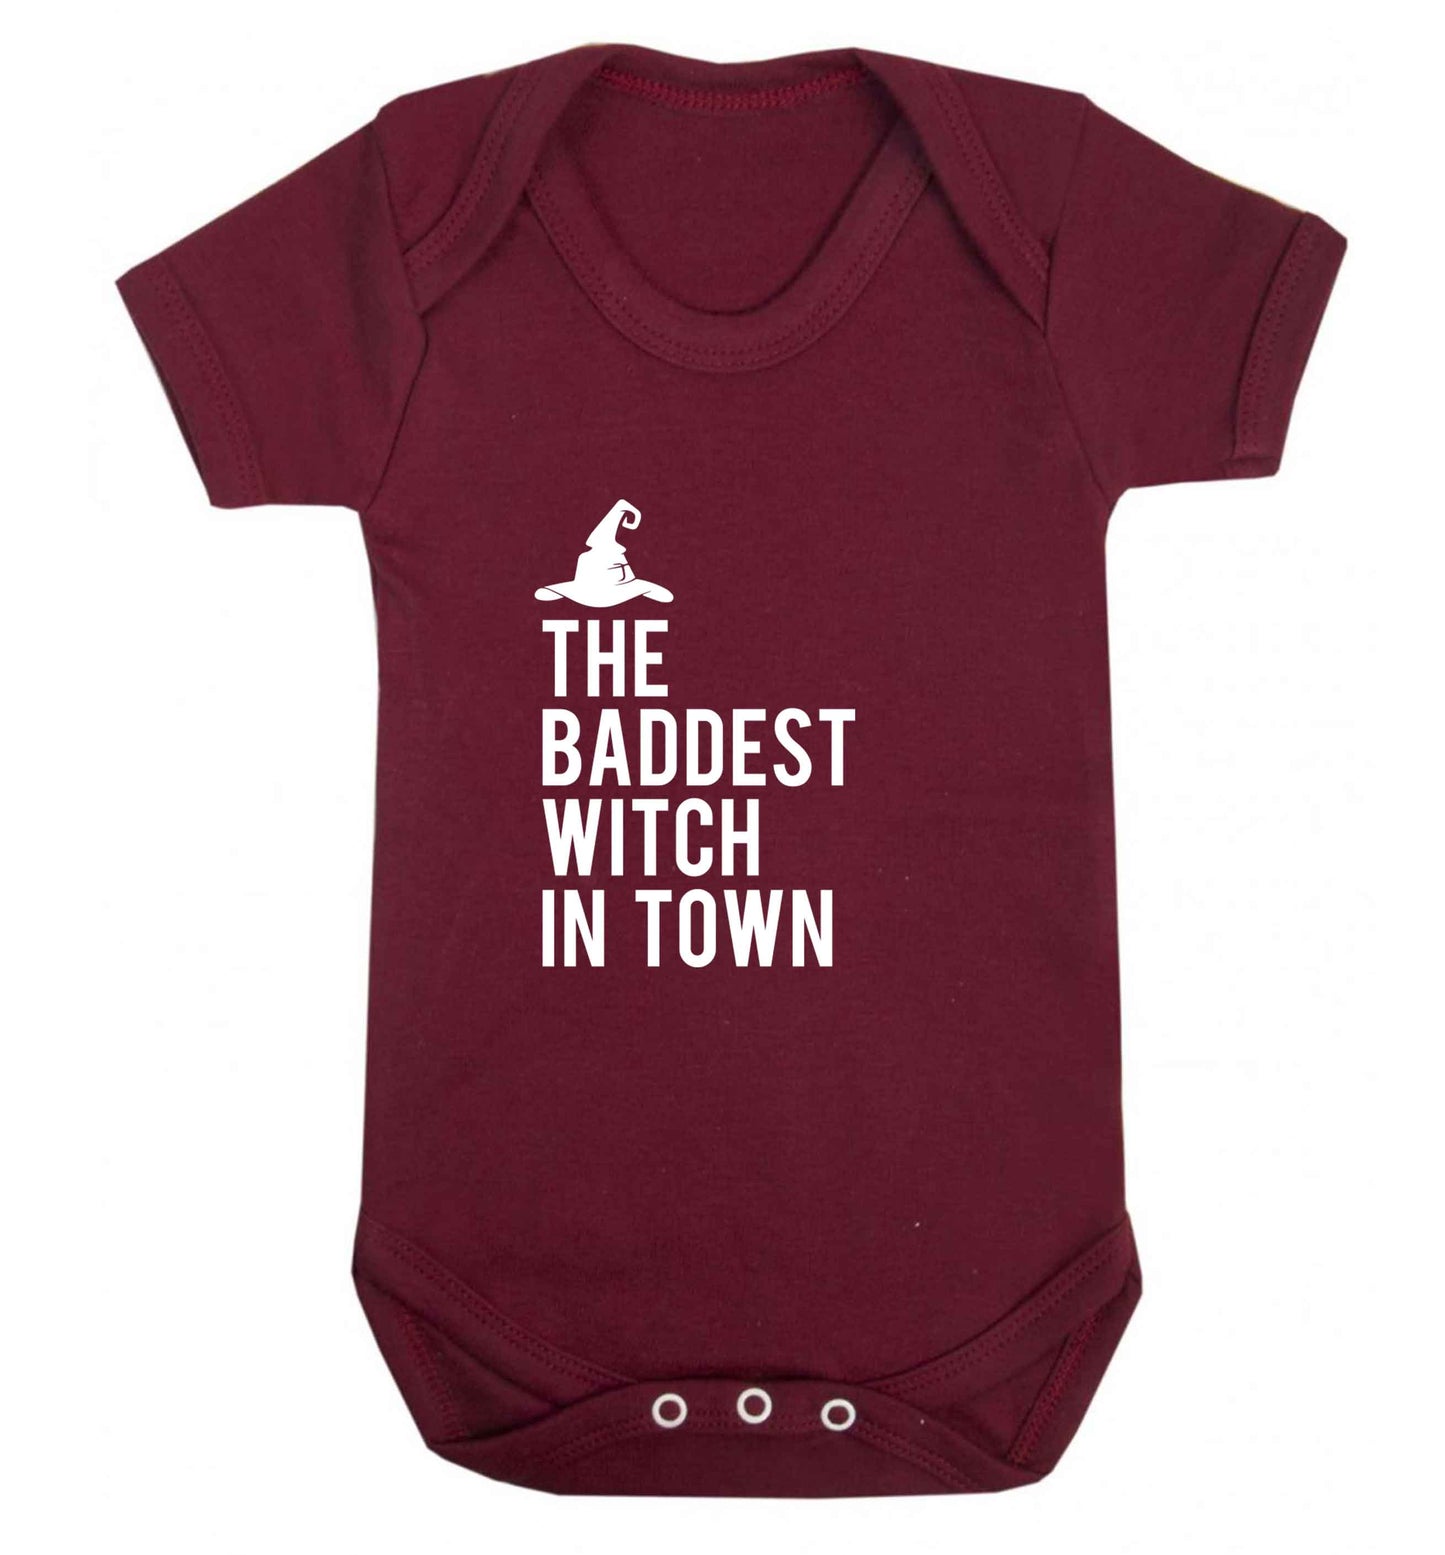 Badest witch in town baby vest maroon 18-24 months